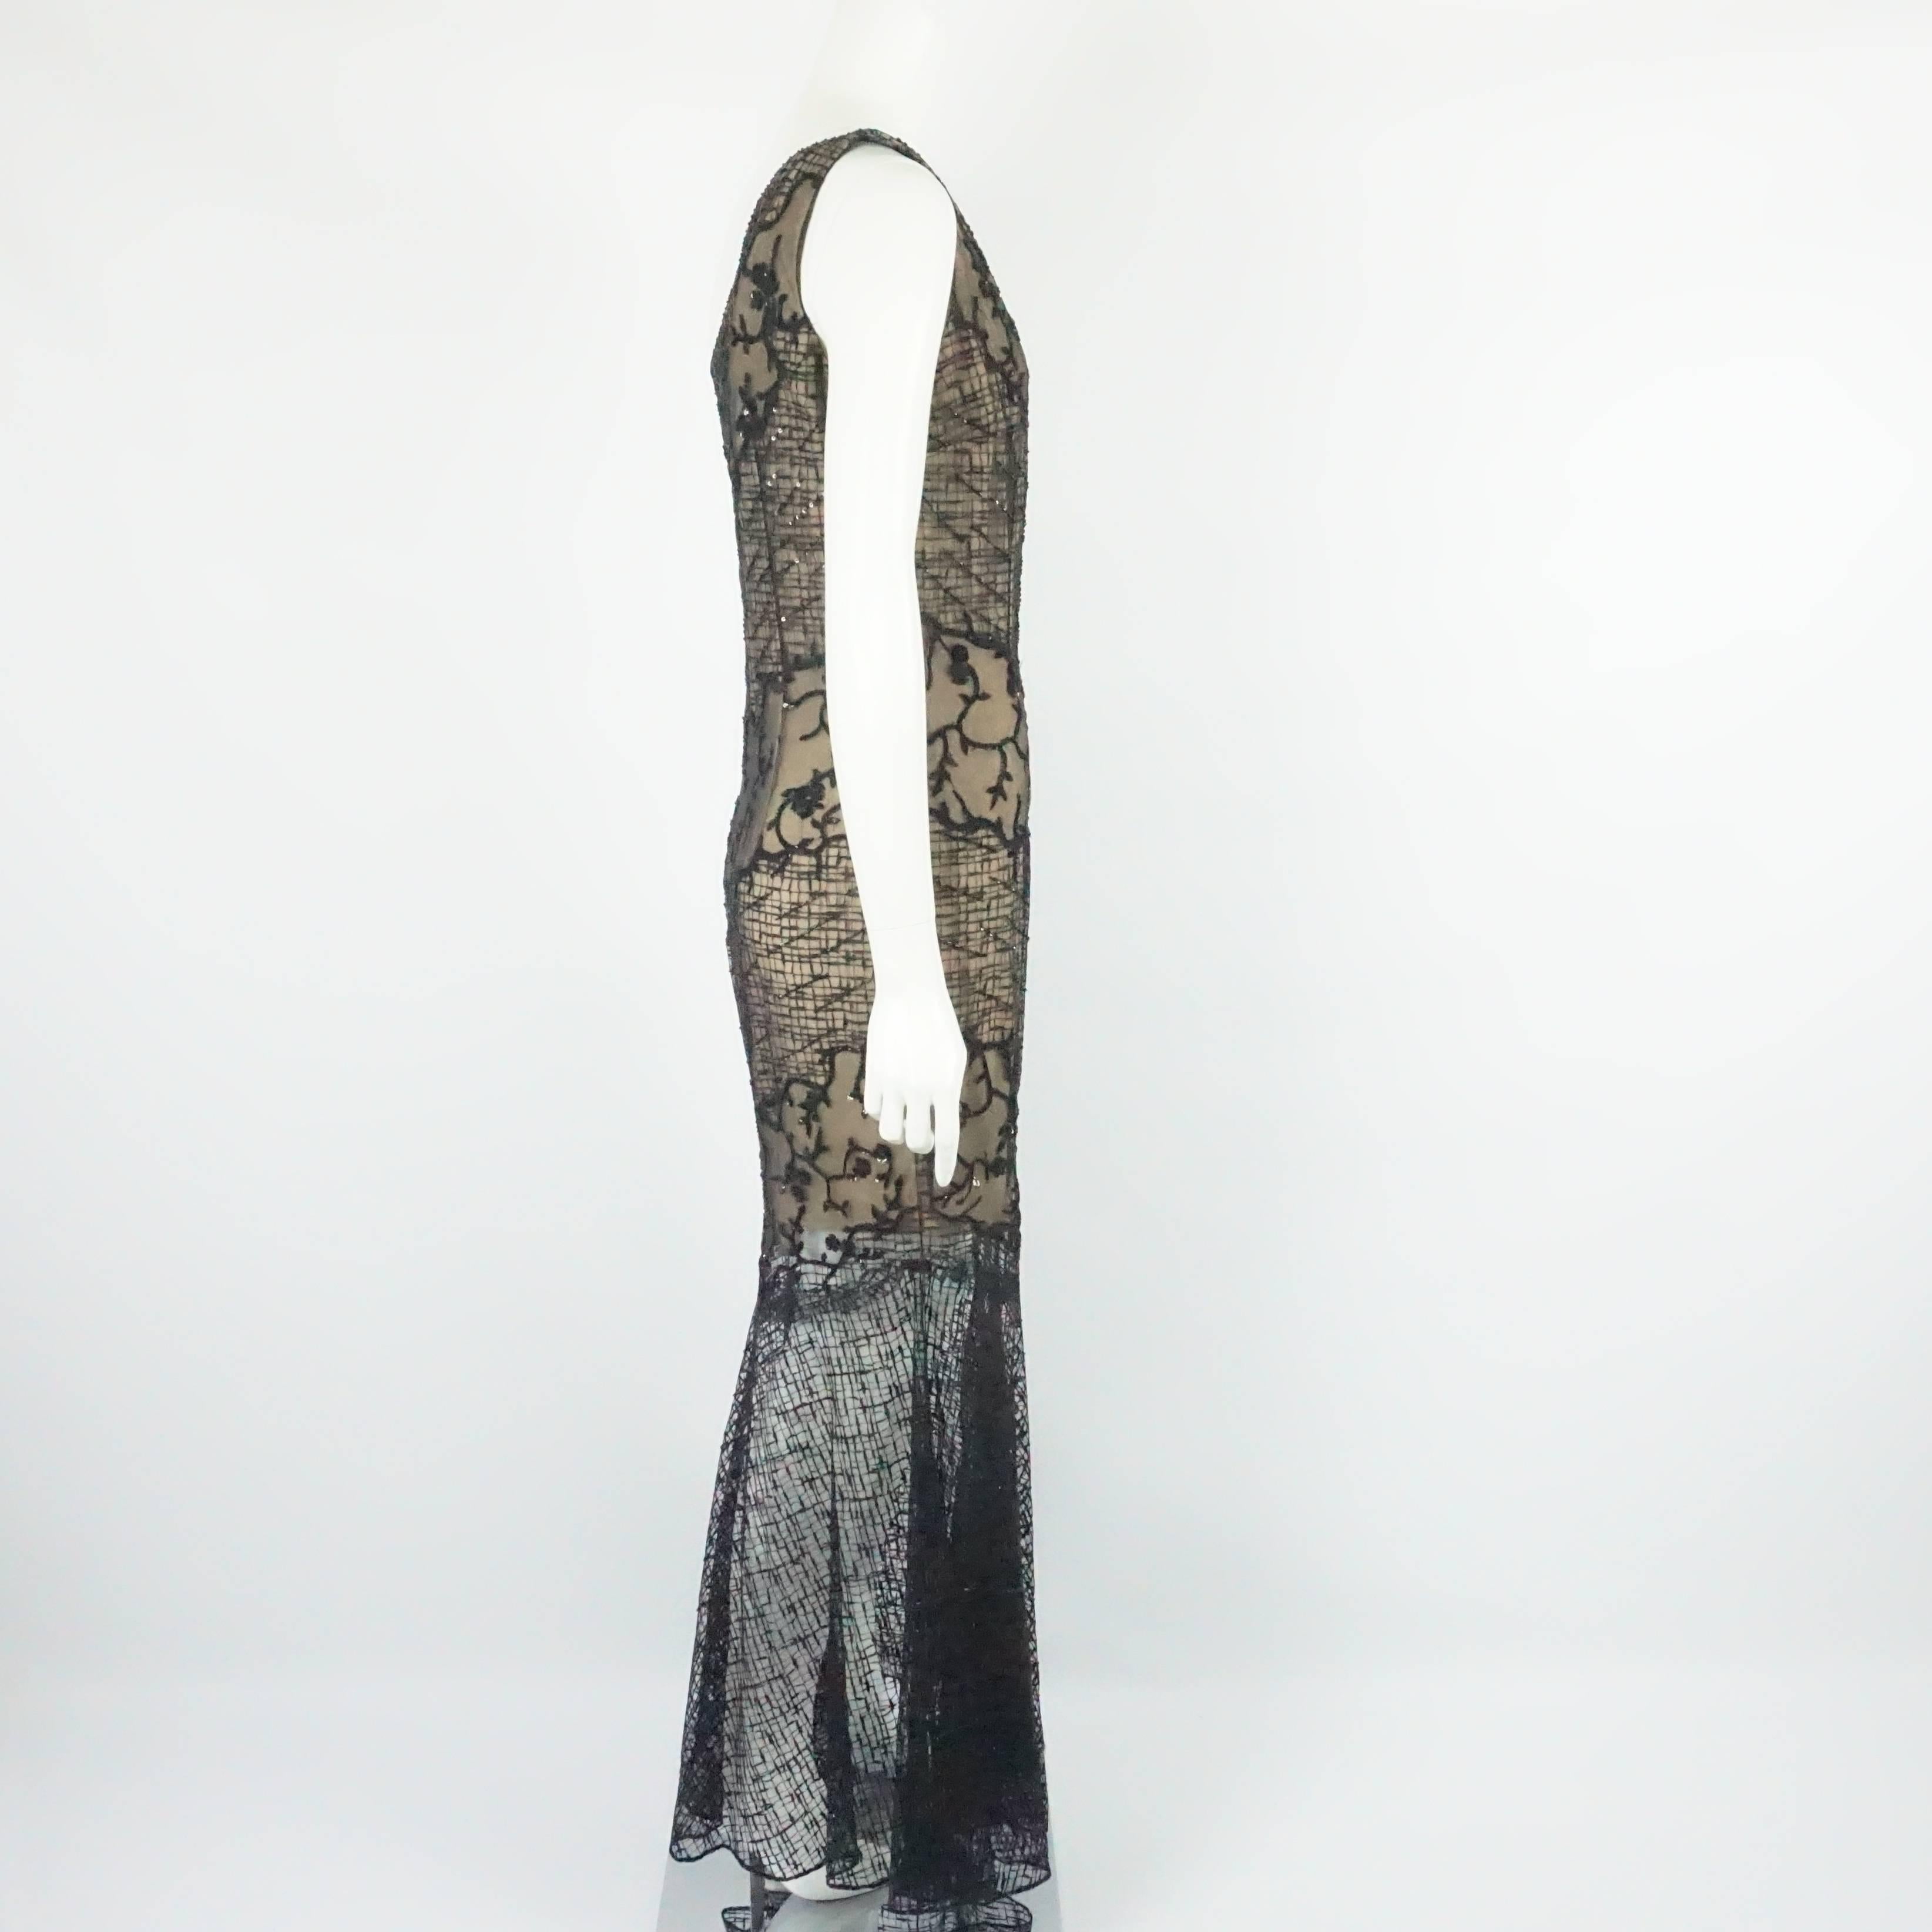 Oscar de la Renta Black Lace One Shoulder beaded Gown-10-Circa 90's This beautiful one shoulder beaded black lace gown has a nude color silk lining only up to the knee, and the bottom part of the gown is unlined and see through giving it a very